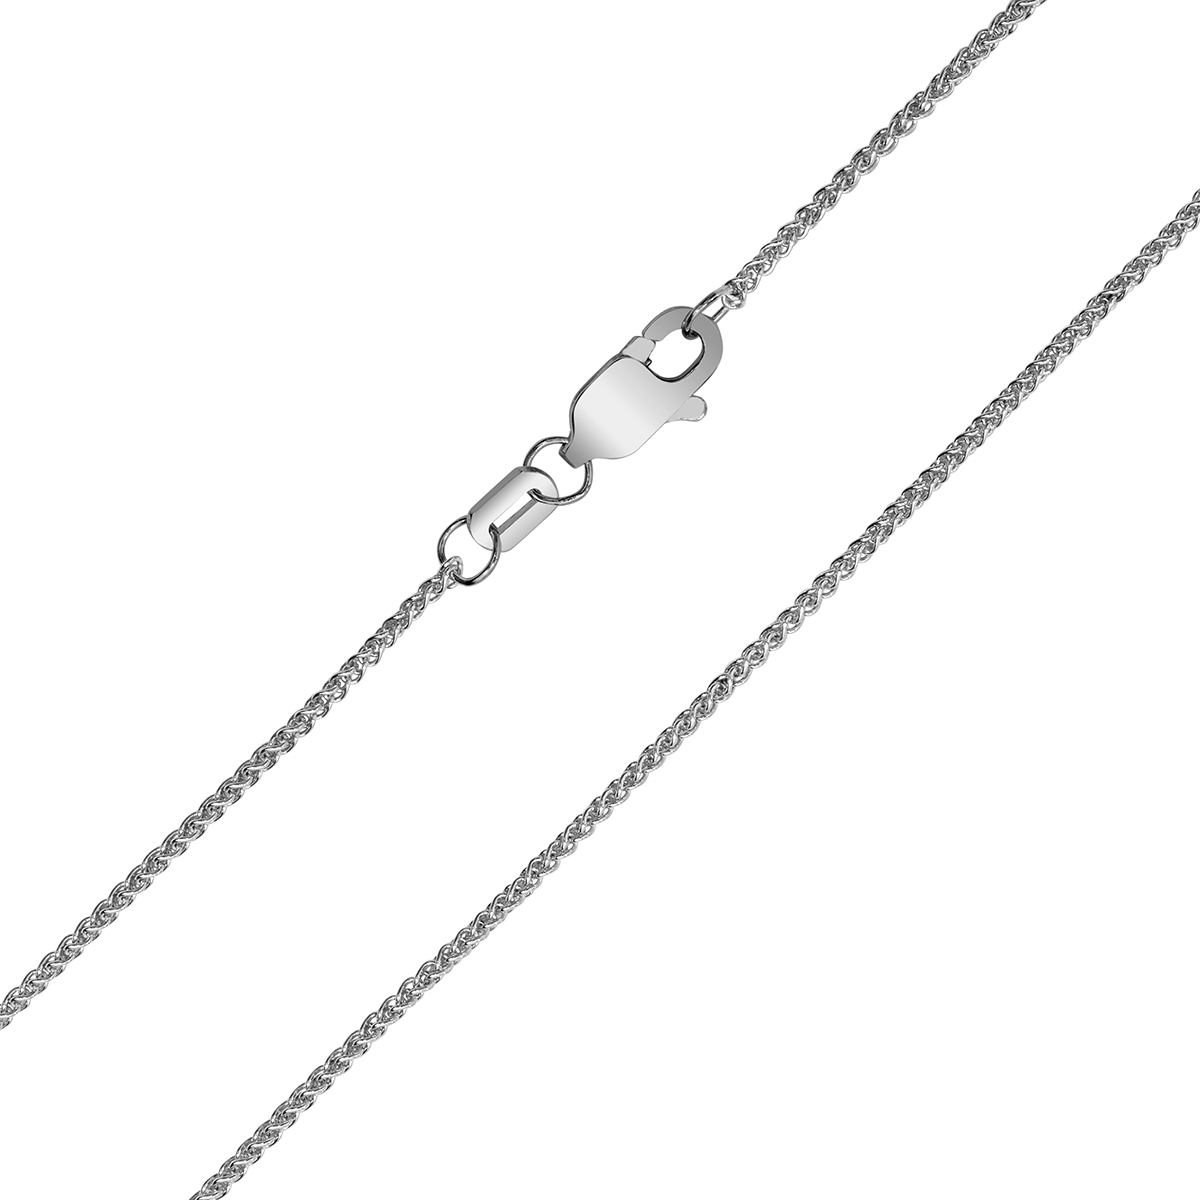 10K White Gold 1mm Wheat Chain with Lobster Clasp - 18 Inch